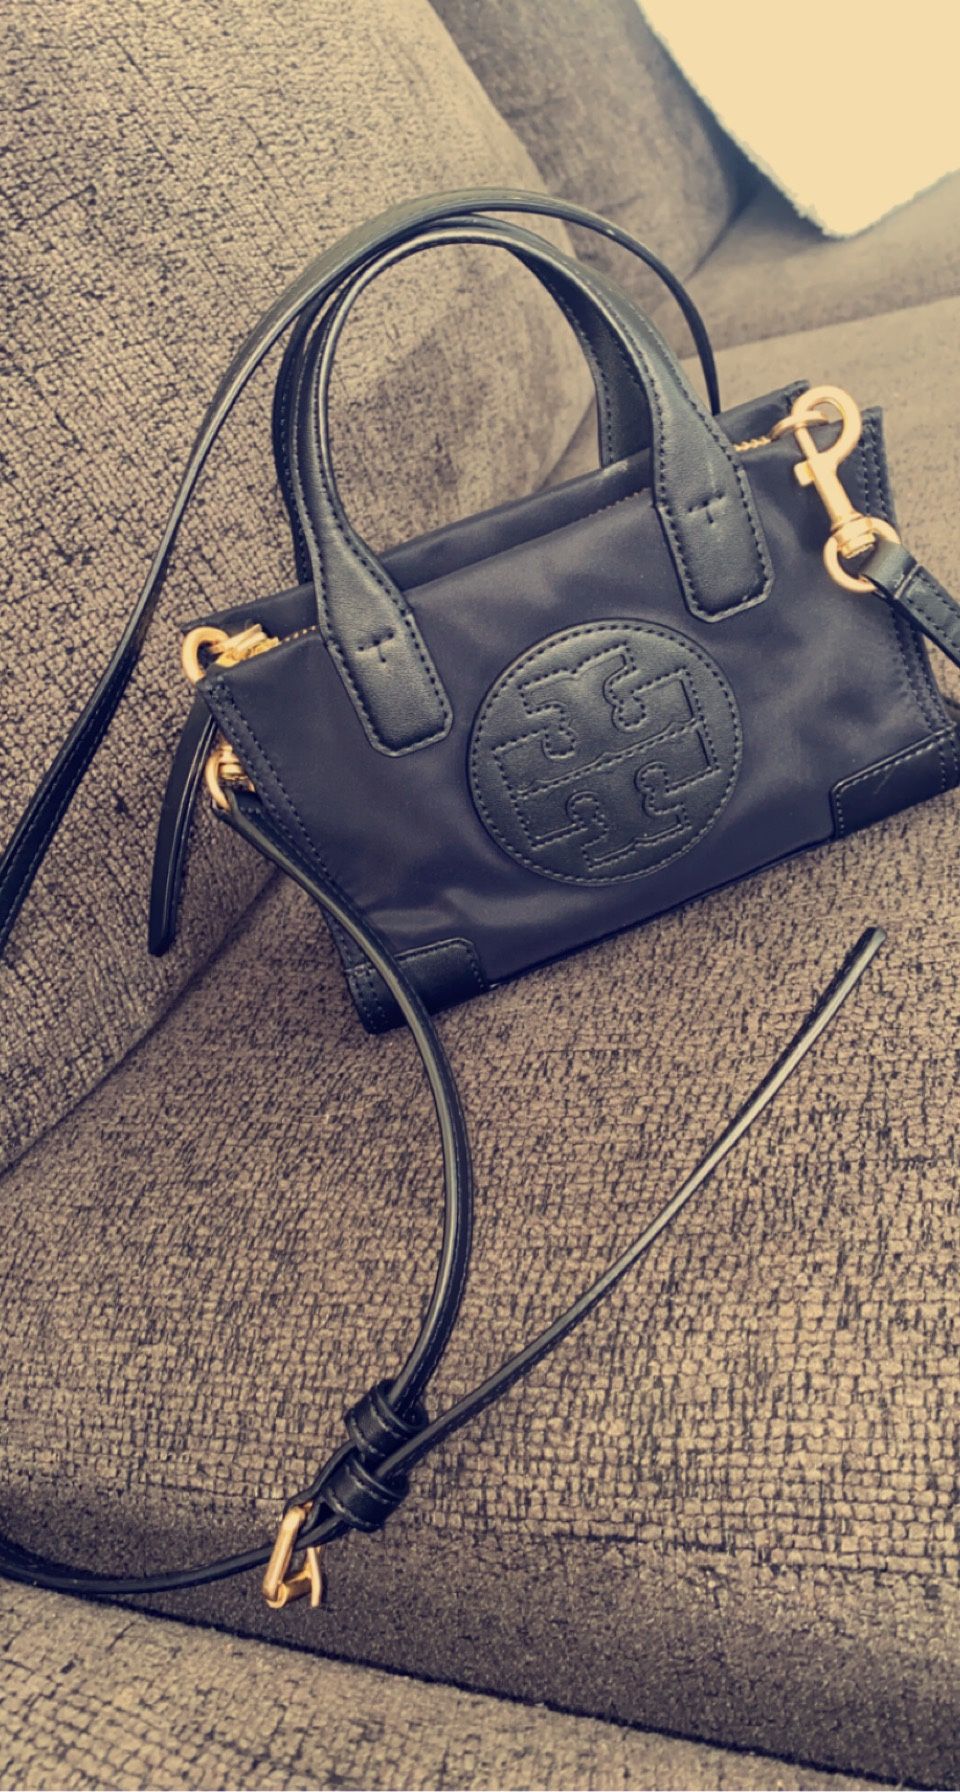 Tory Burch Purse(s) for Sale in Inglewood, CA - OfferUp